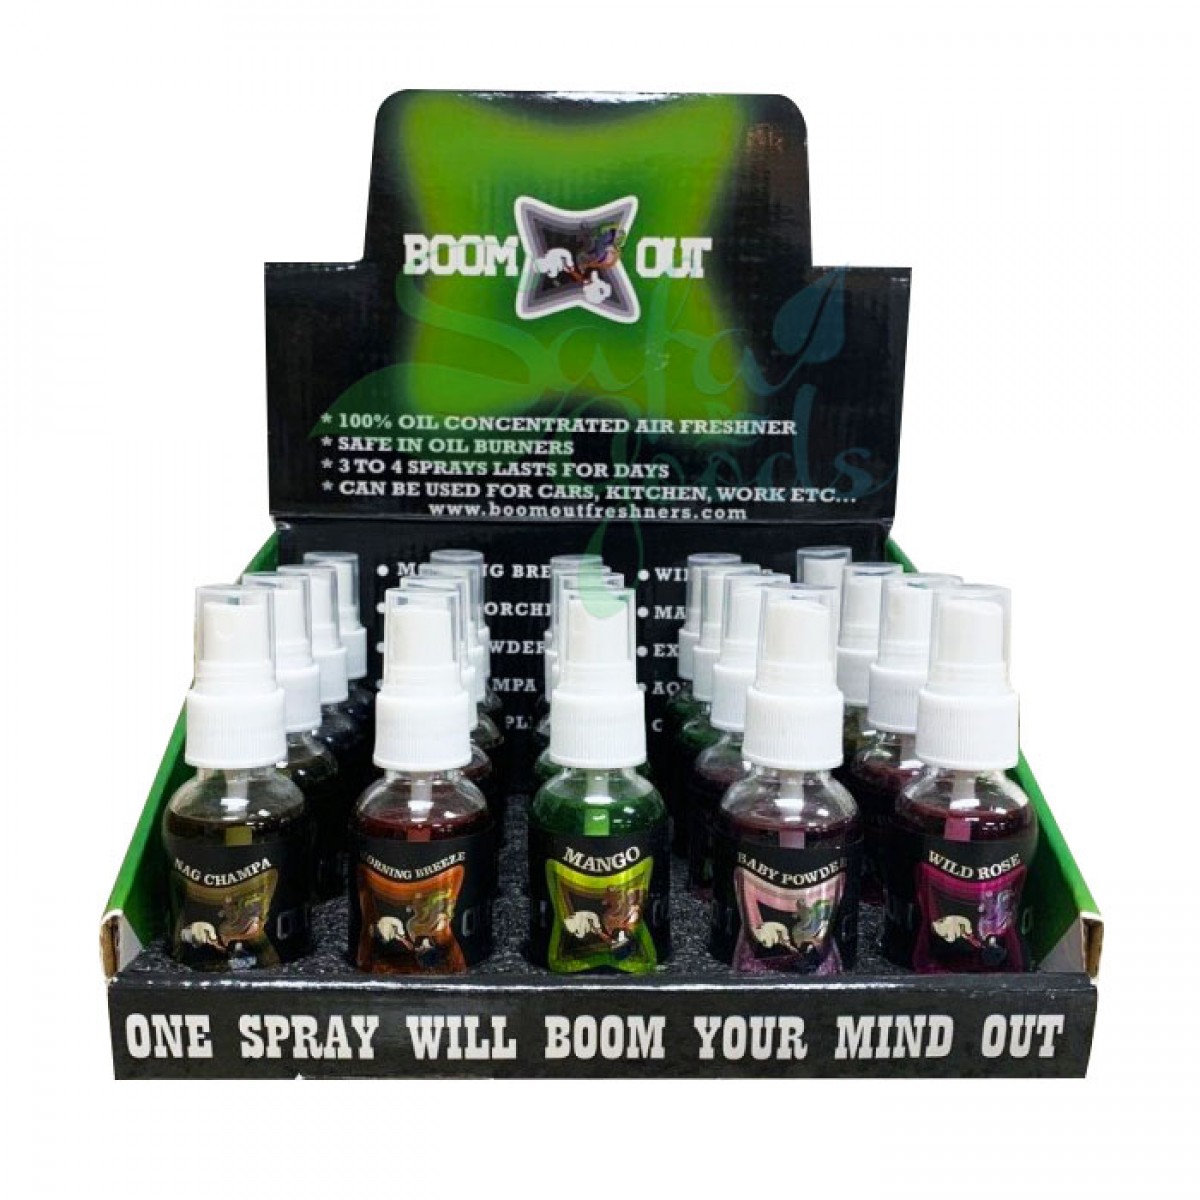 Boom Out Air Freshener - 20CT Display